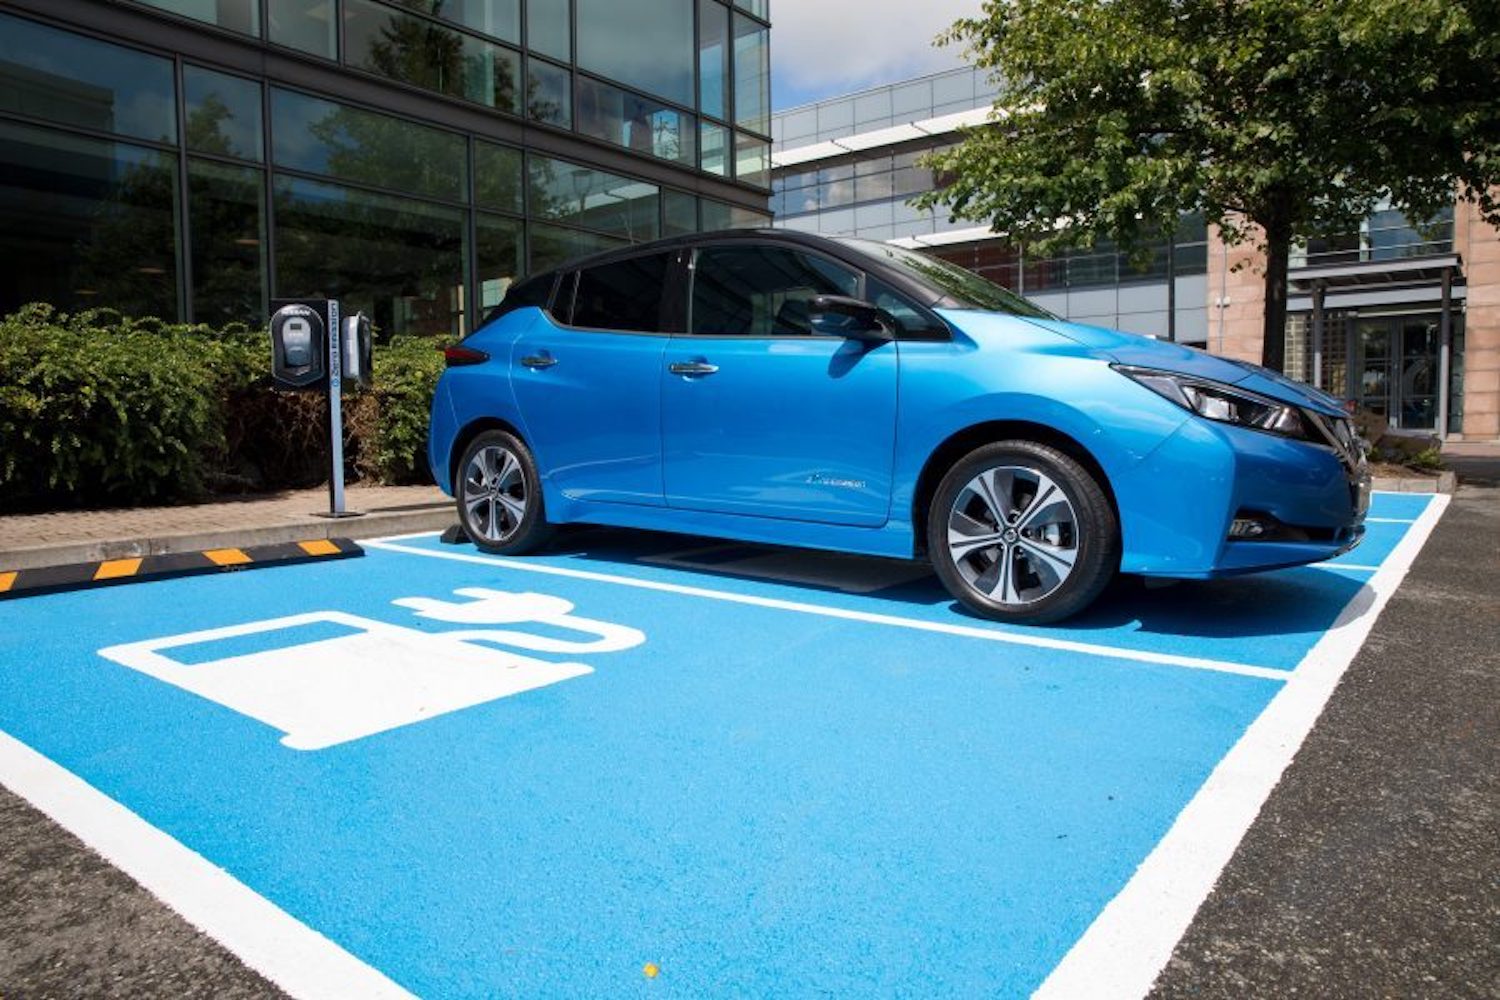 Quarter of new cars viewed on Carzone are electric